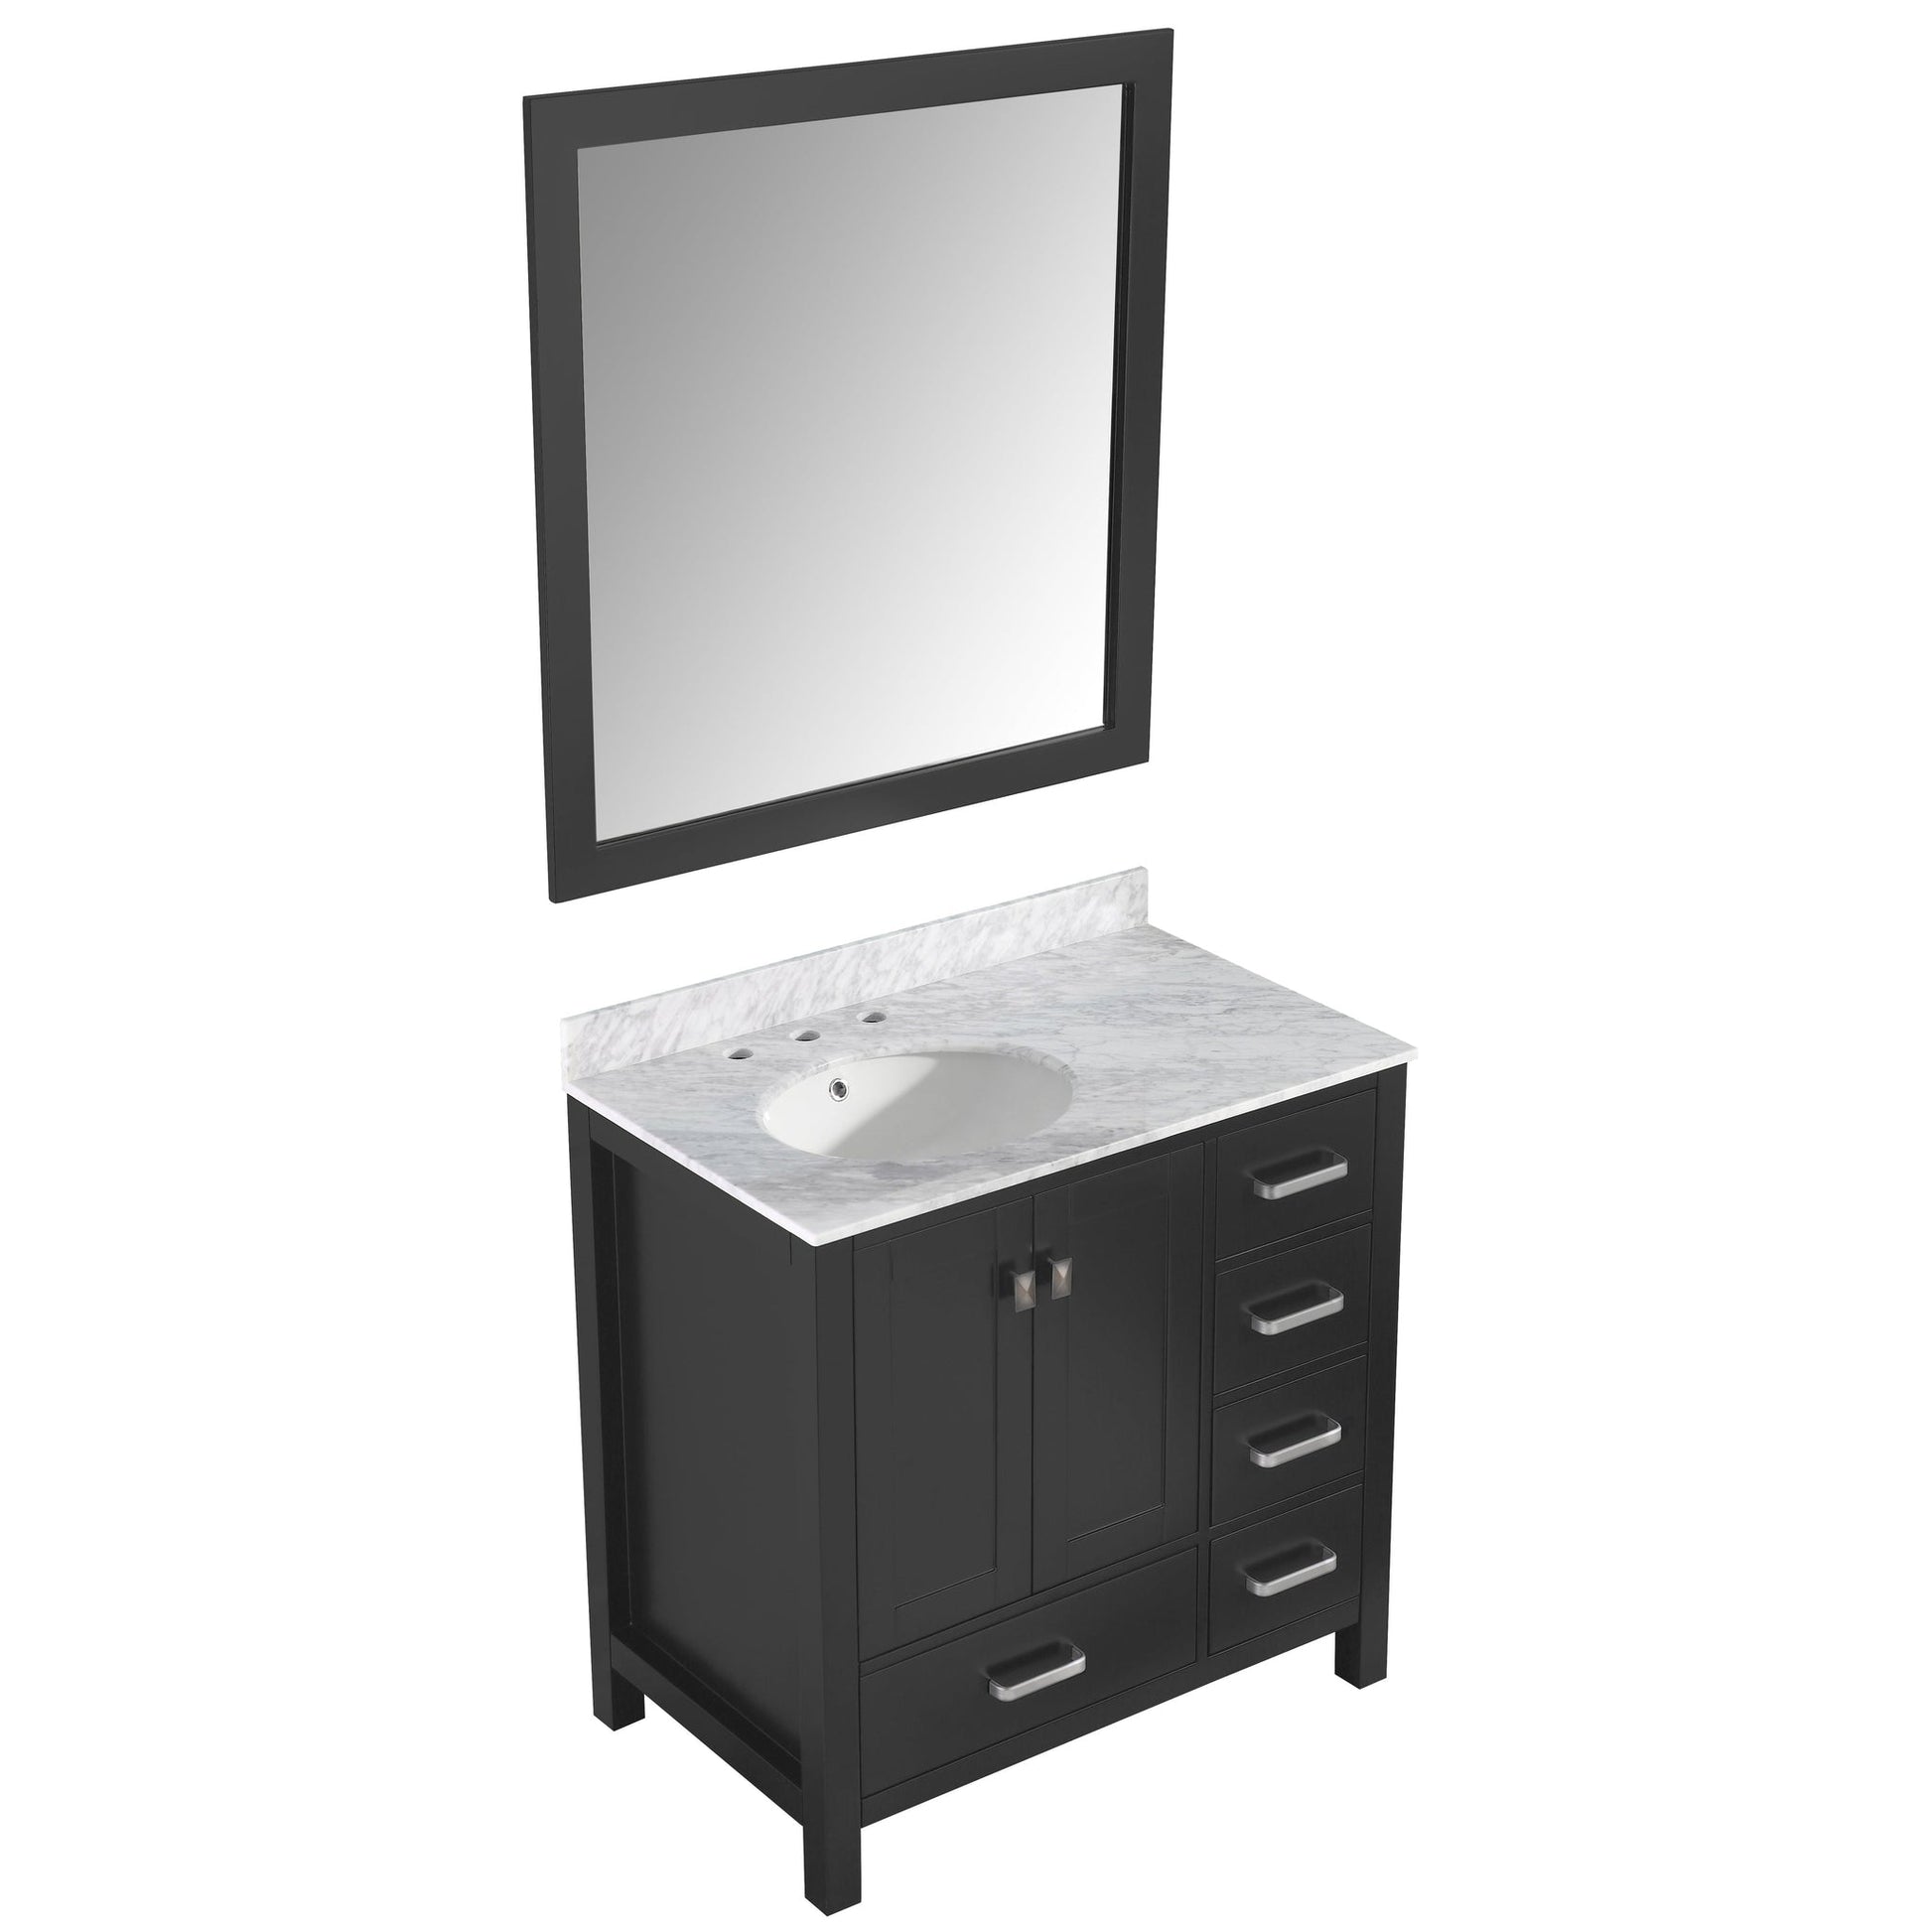 ANZZI Chateau Series 36" x 35" Rich Black Solid Wood Bathroom Vanity With White Carrara Marble Countertop, Basin Sink and Mirror